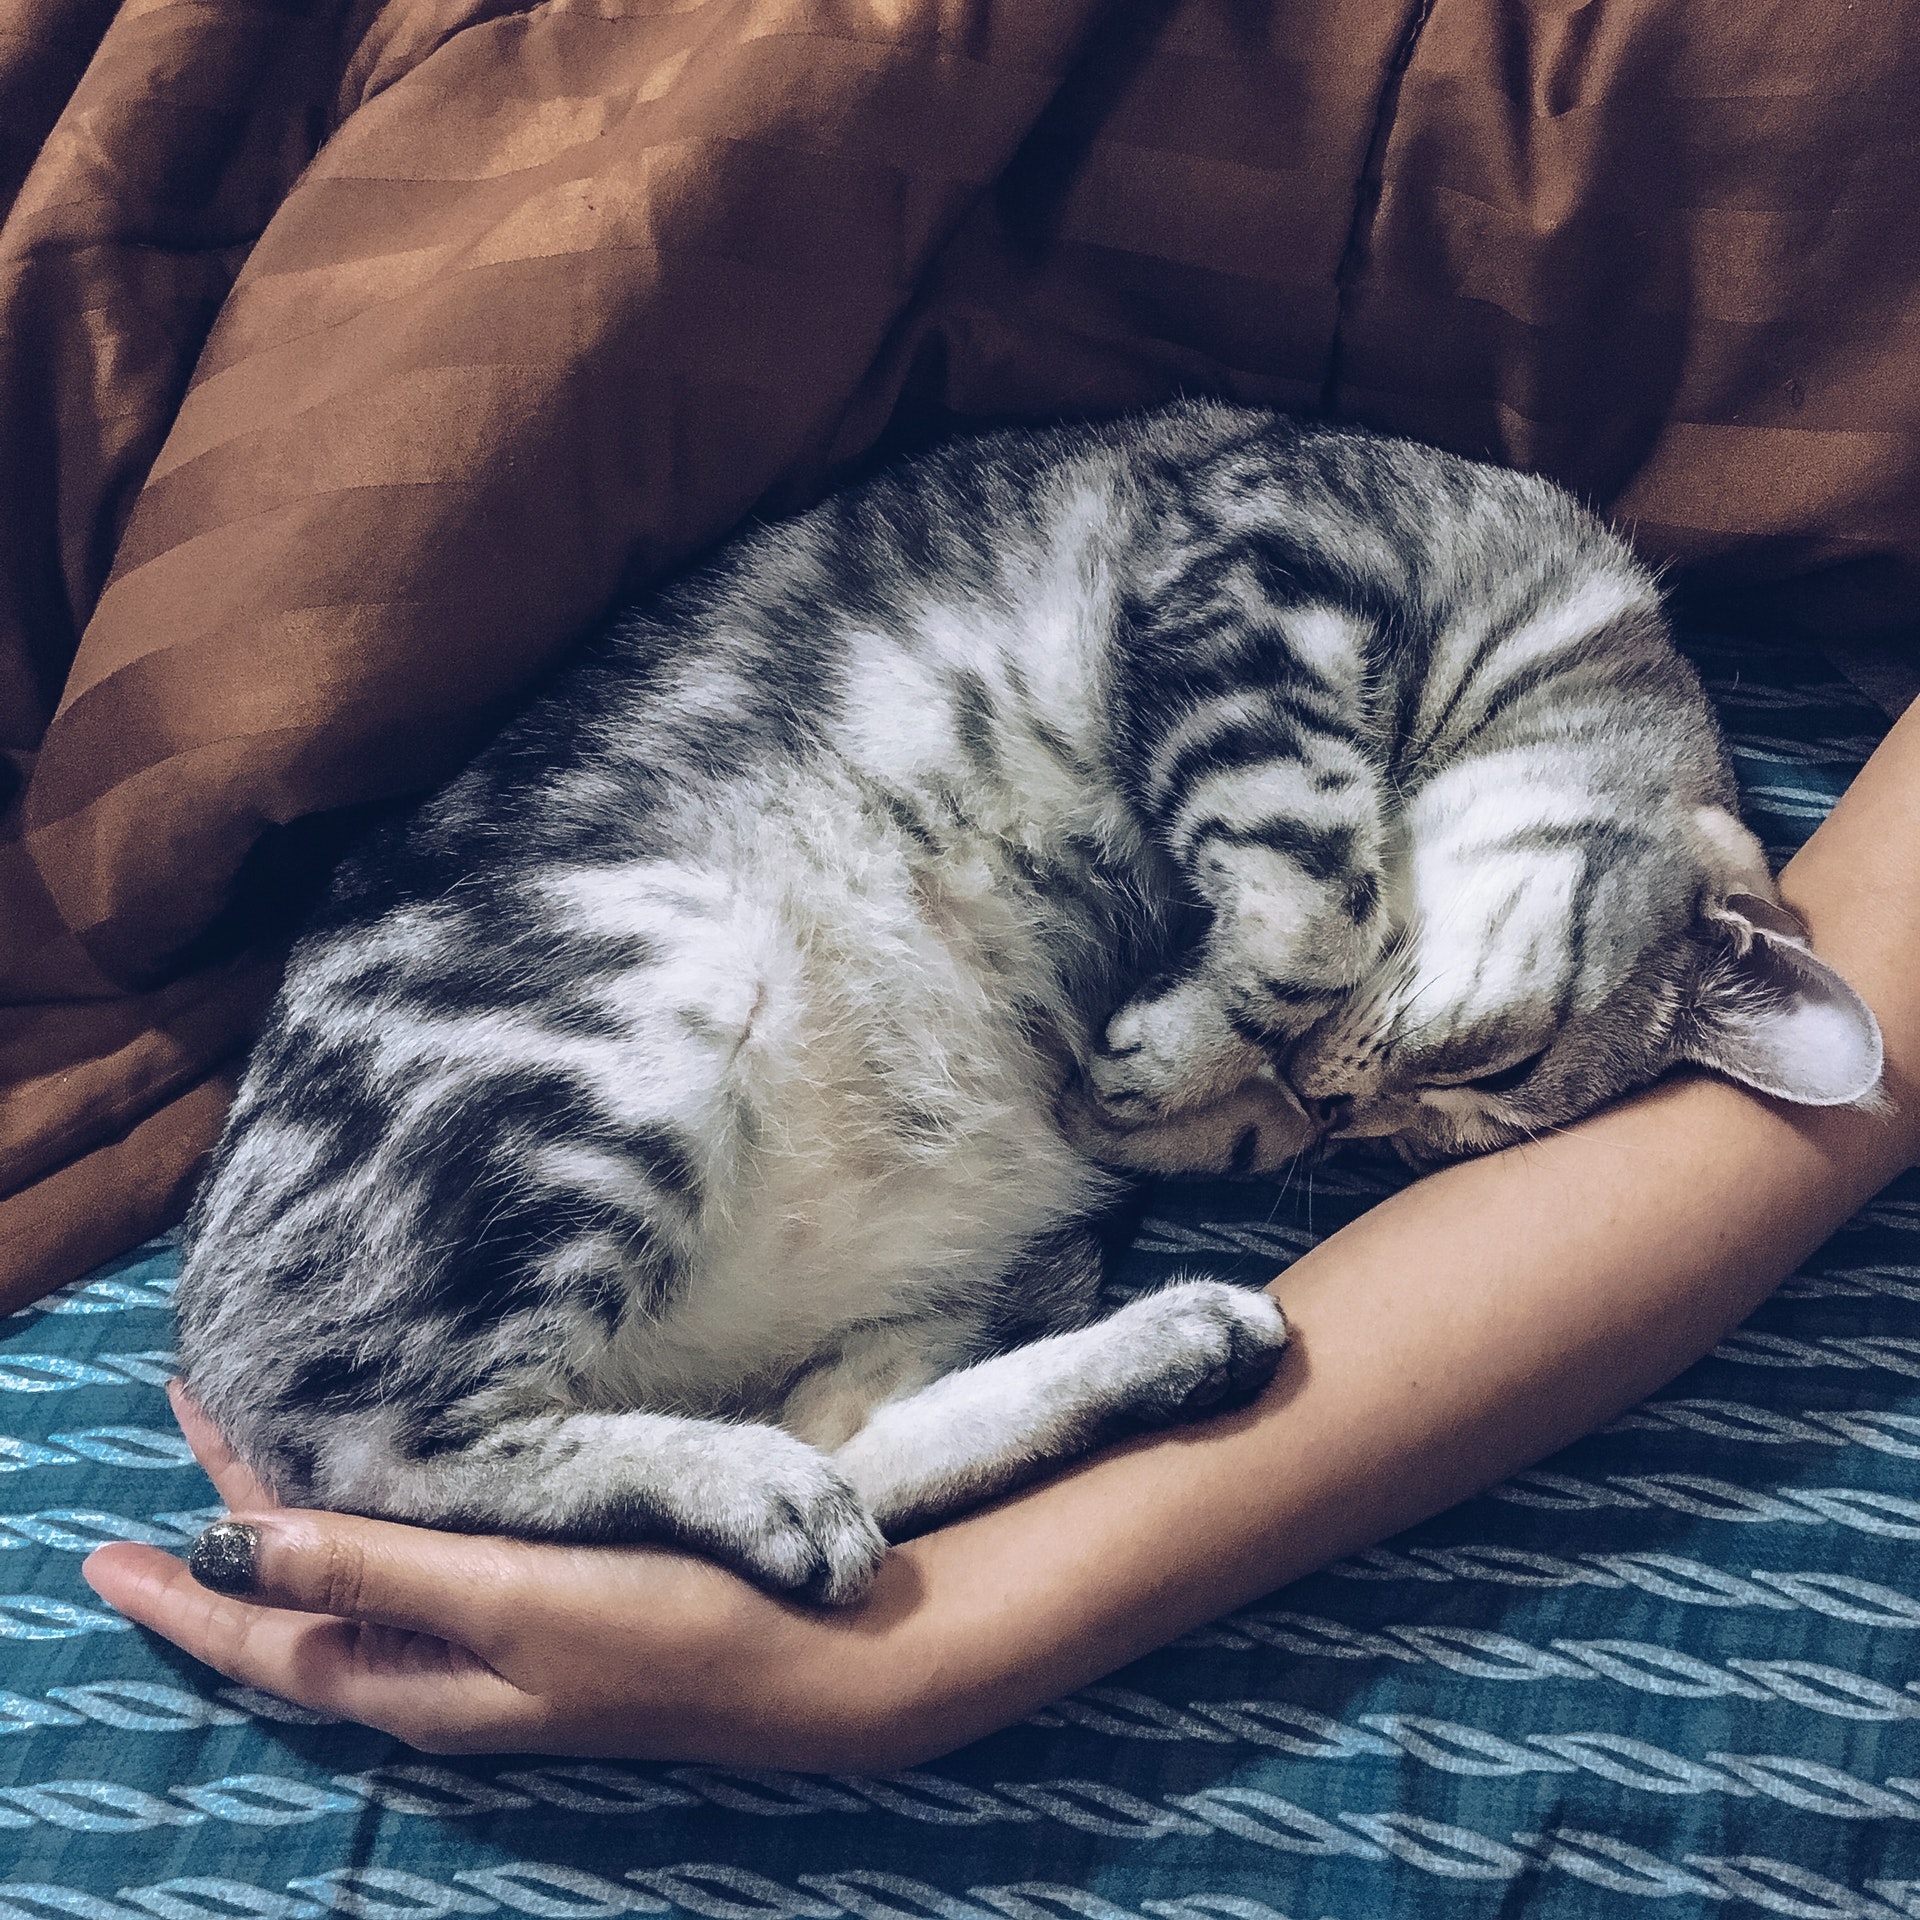 A silver tabby cat curled in a person's arm in bed